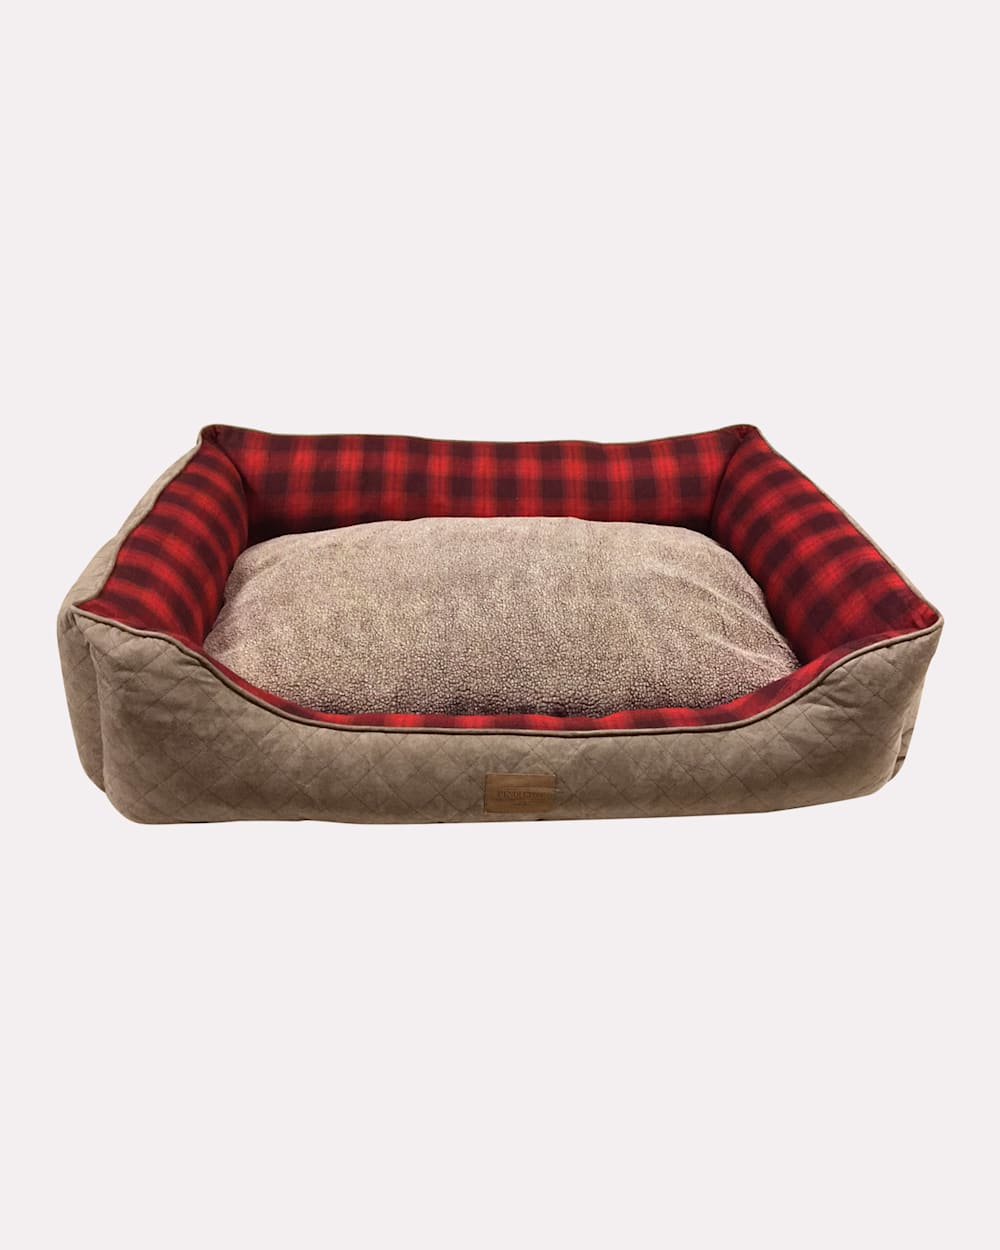 ALTERNATE VIEW OF RED OMBRE KUDDLER DOG BED IN SIZE MEDIUM image number 2